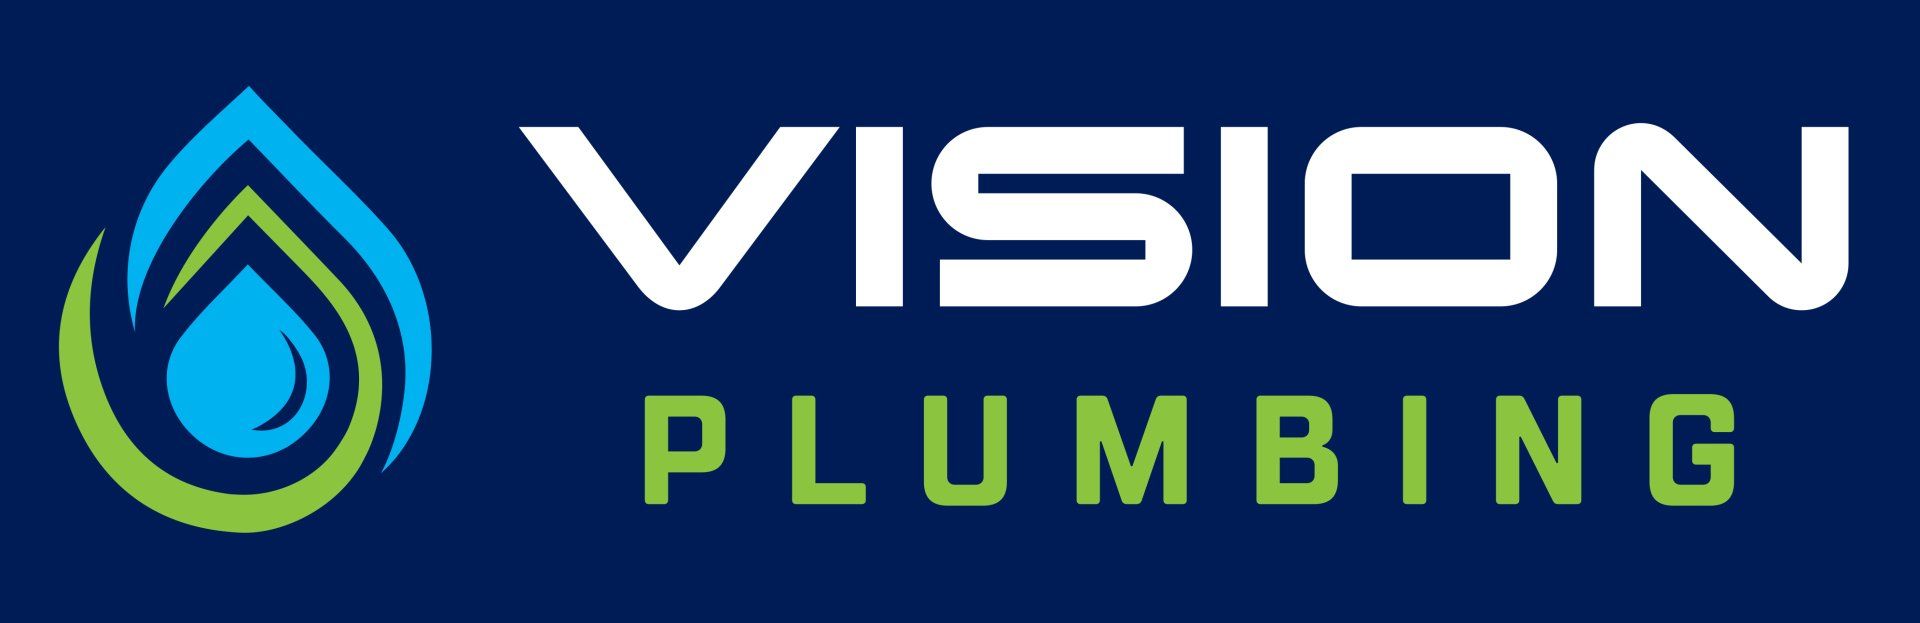 Vision Plumbing: Your Local, Licensed Plumbers